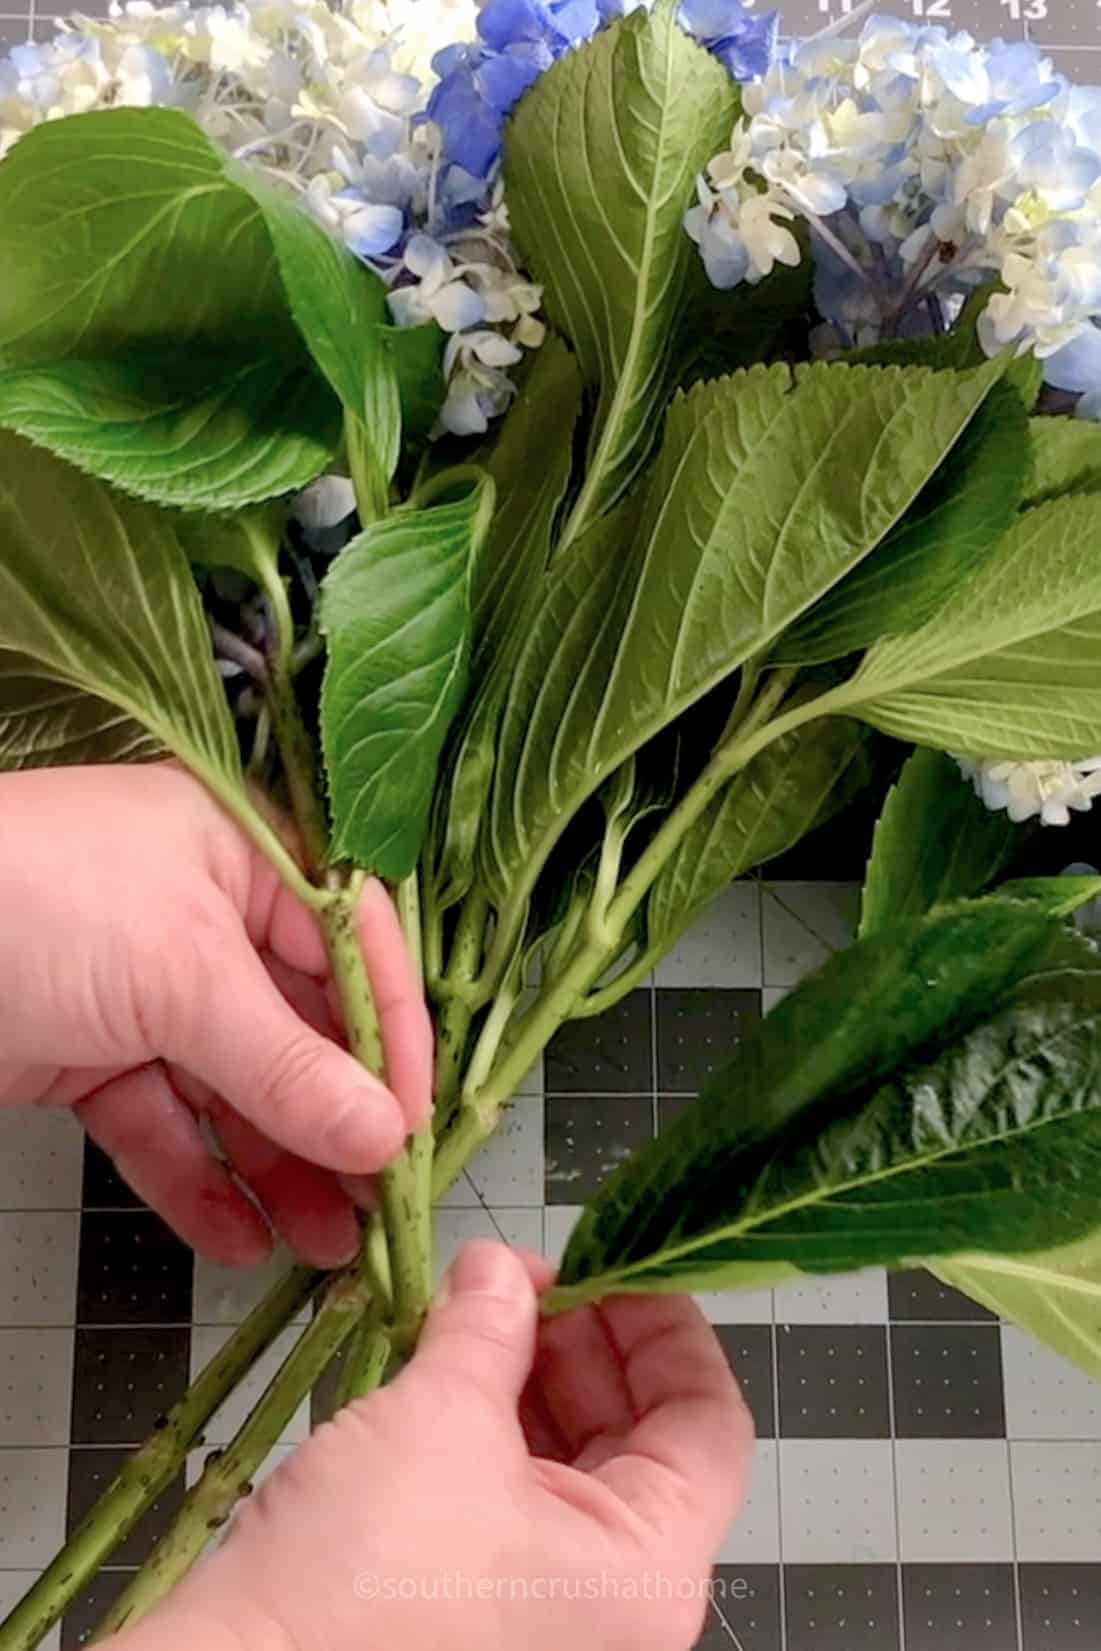 removing leaves from stems